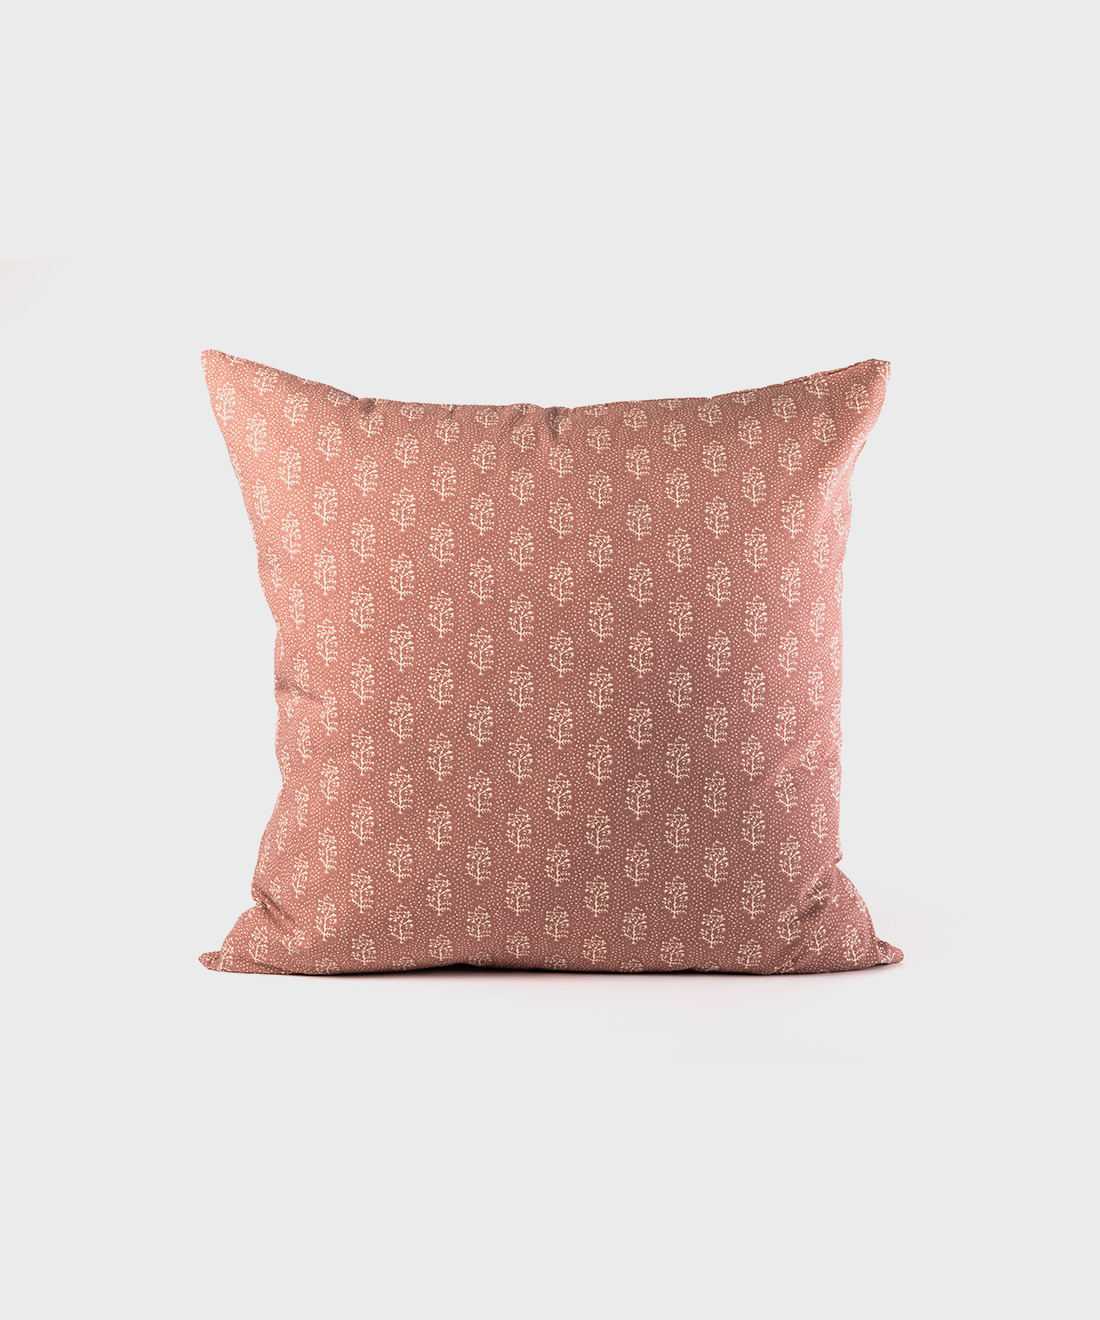 Clove Scatter Cushion in Mulberry (Cotton)